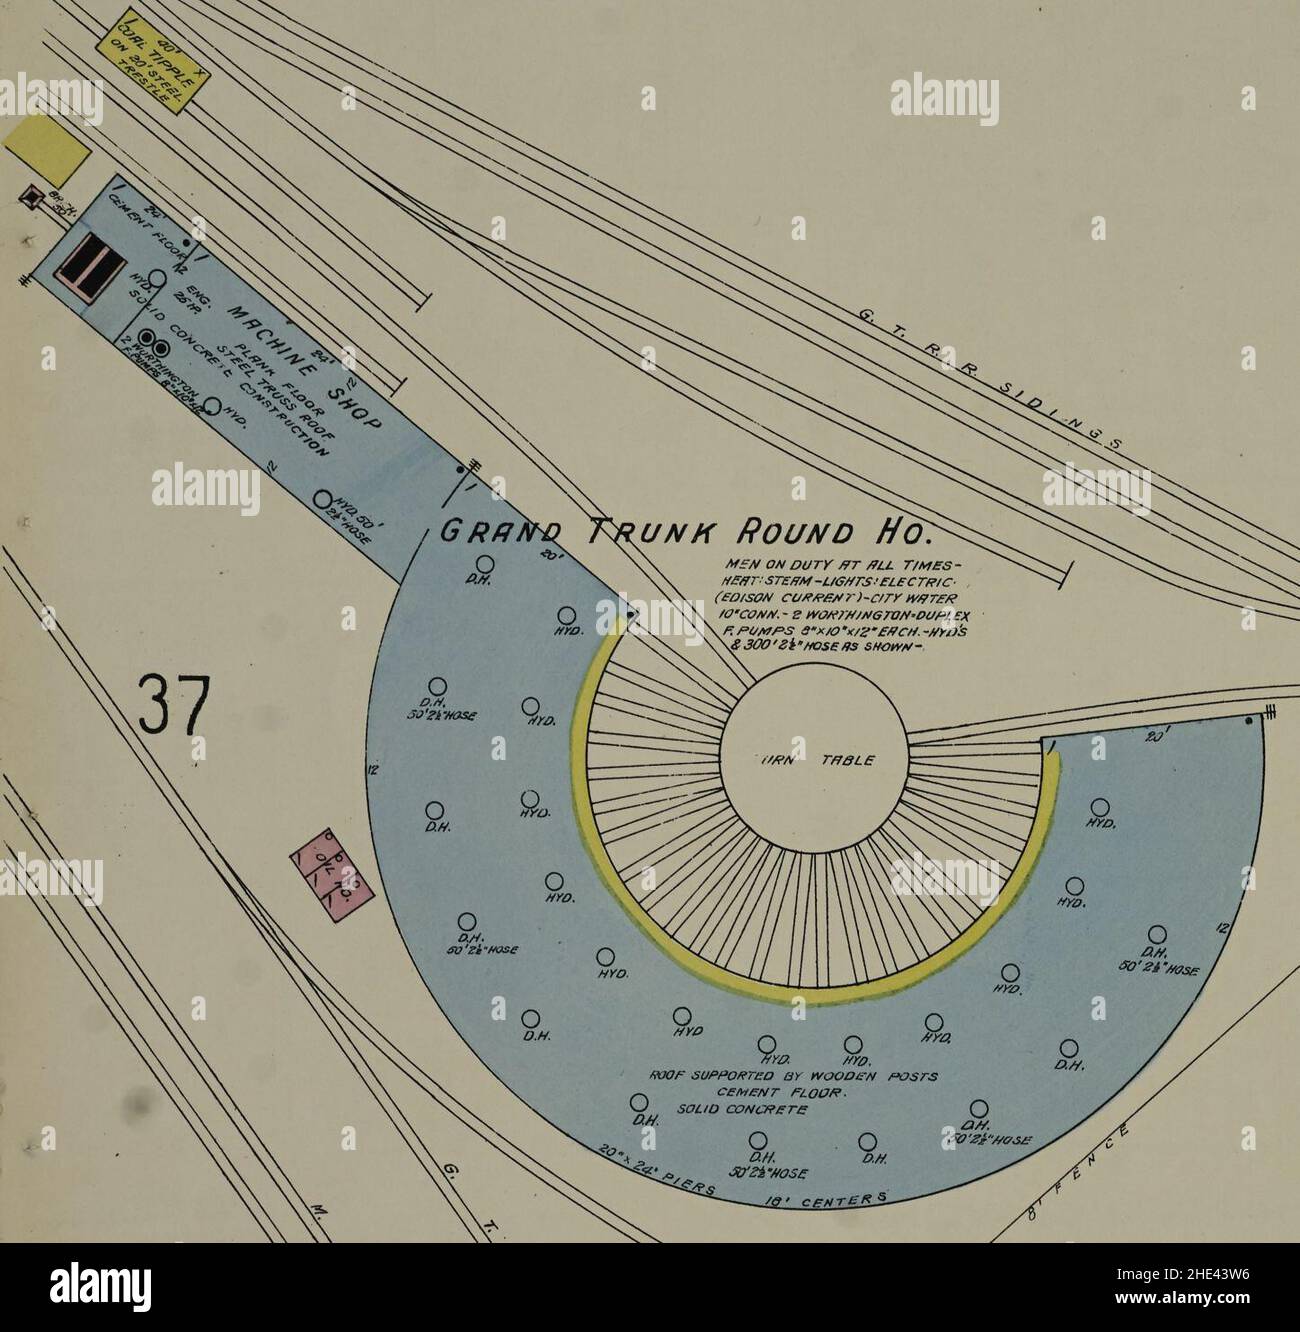 Round House of the Grand Trunk Railroad, Turn Table, Machine Shop and Coal Tipple in 1910 map detail, from- Sanborn Fire Insurance Map from Detroit, Wayne County, Michigan. Stock Photo